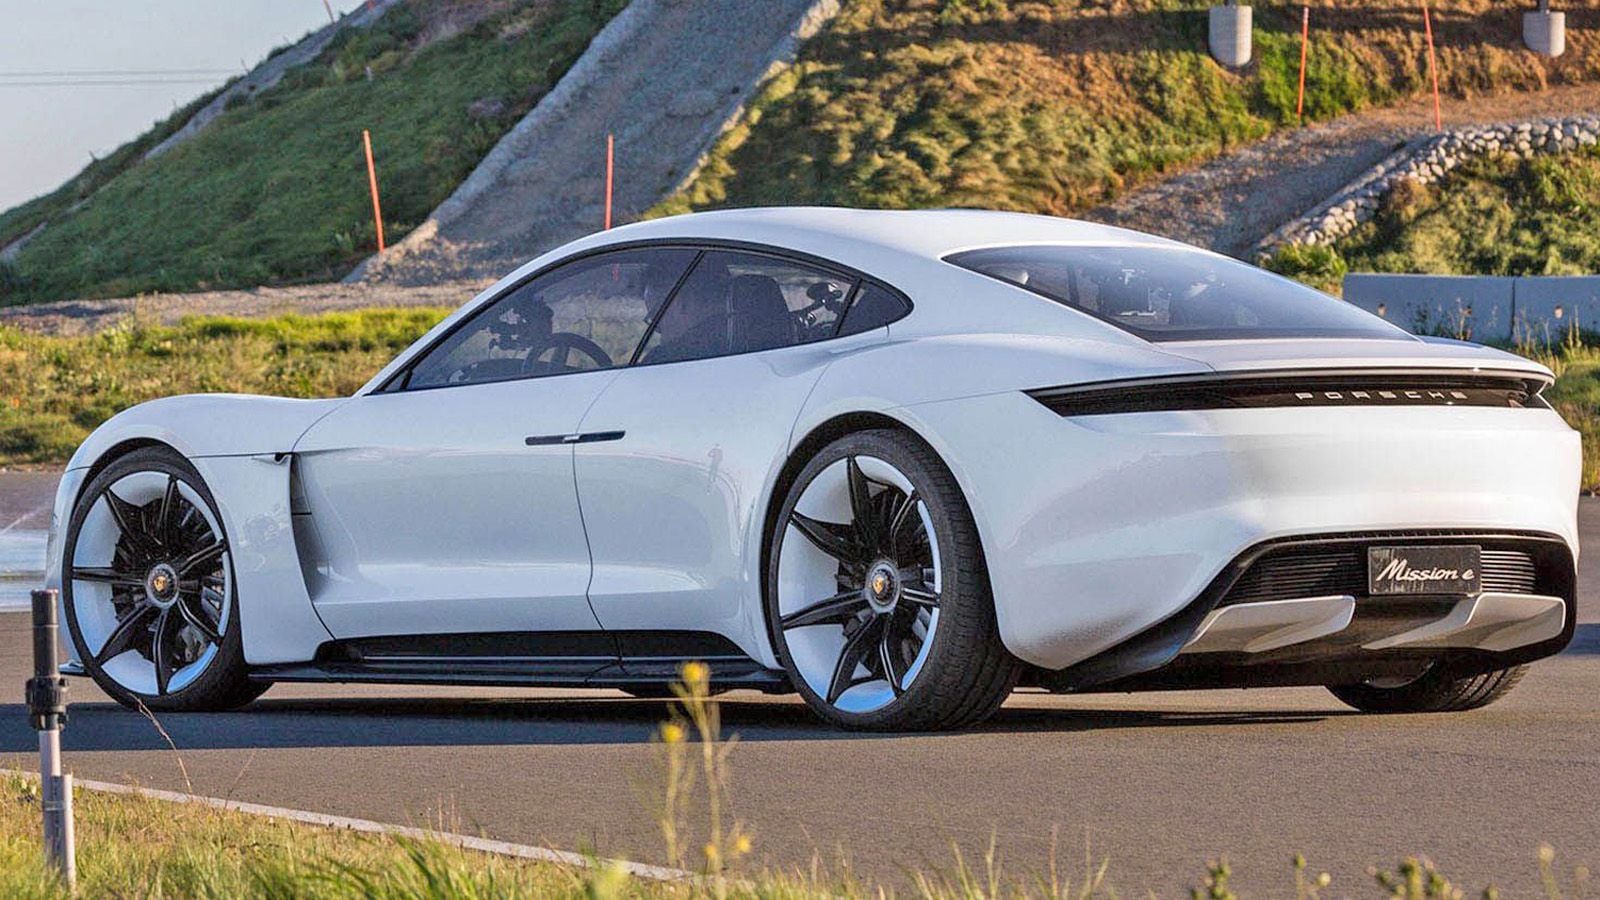 2024 Porsche Taycan Prices, Reviews, and Photos - MotorTrend